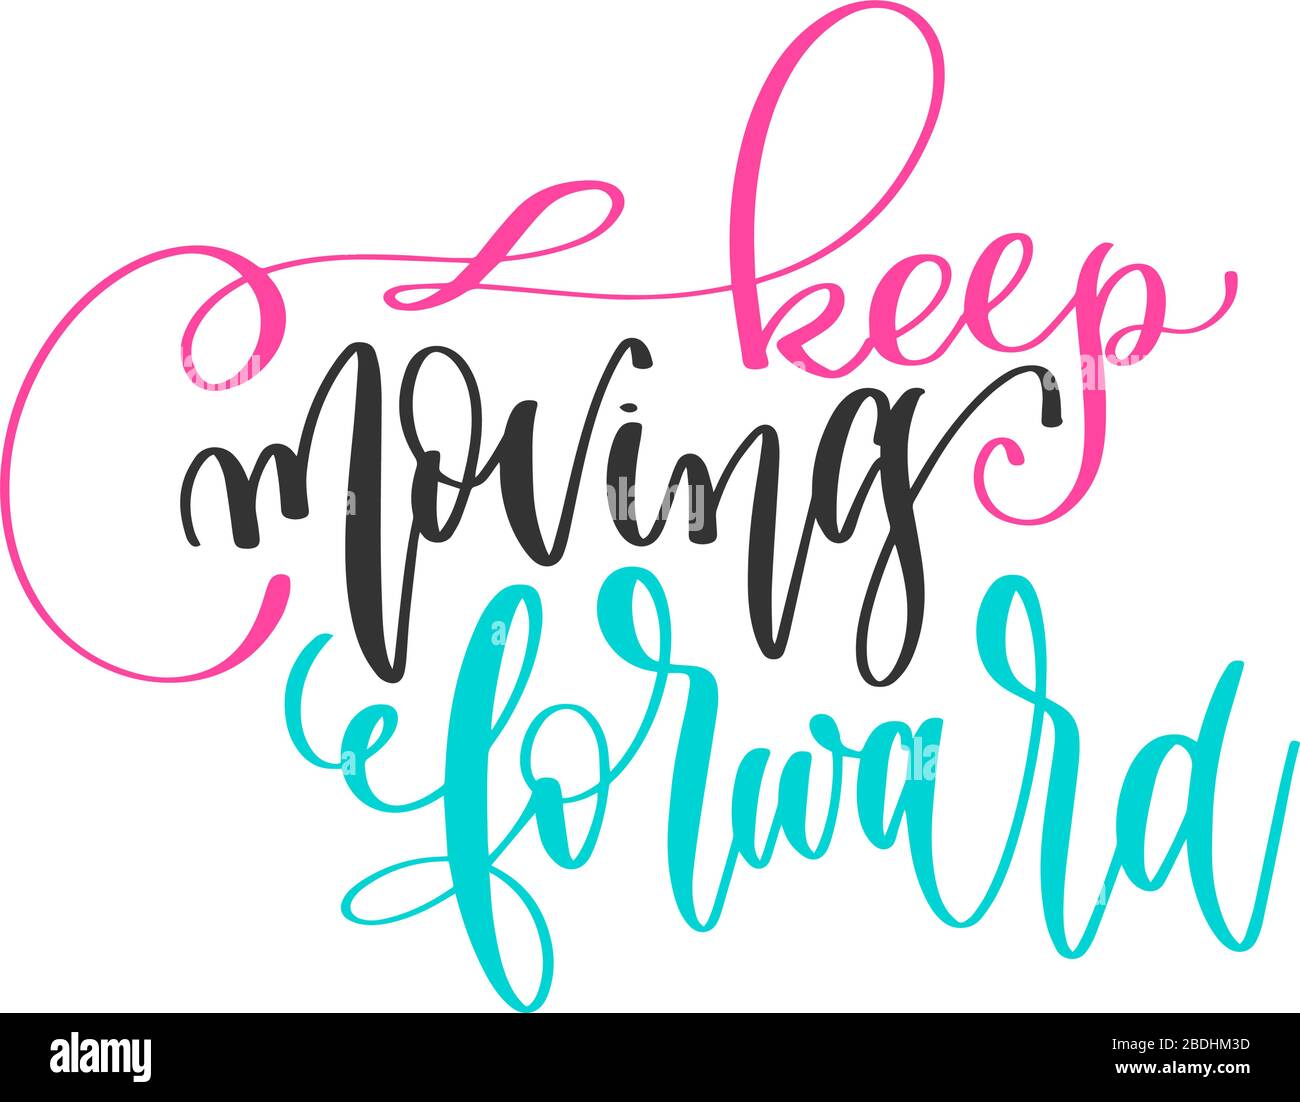 keep moving forward - hand lettering positive quotes design, motivation and inspiration text Stock Vector